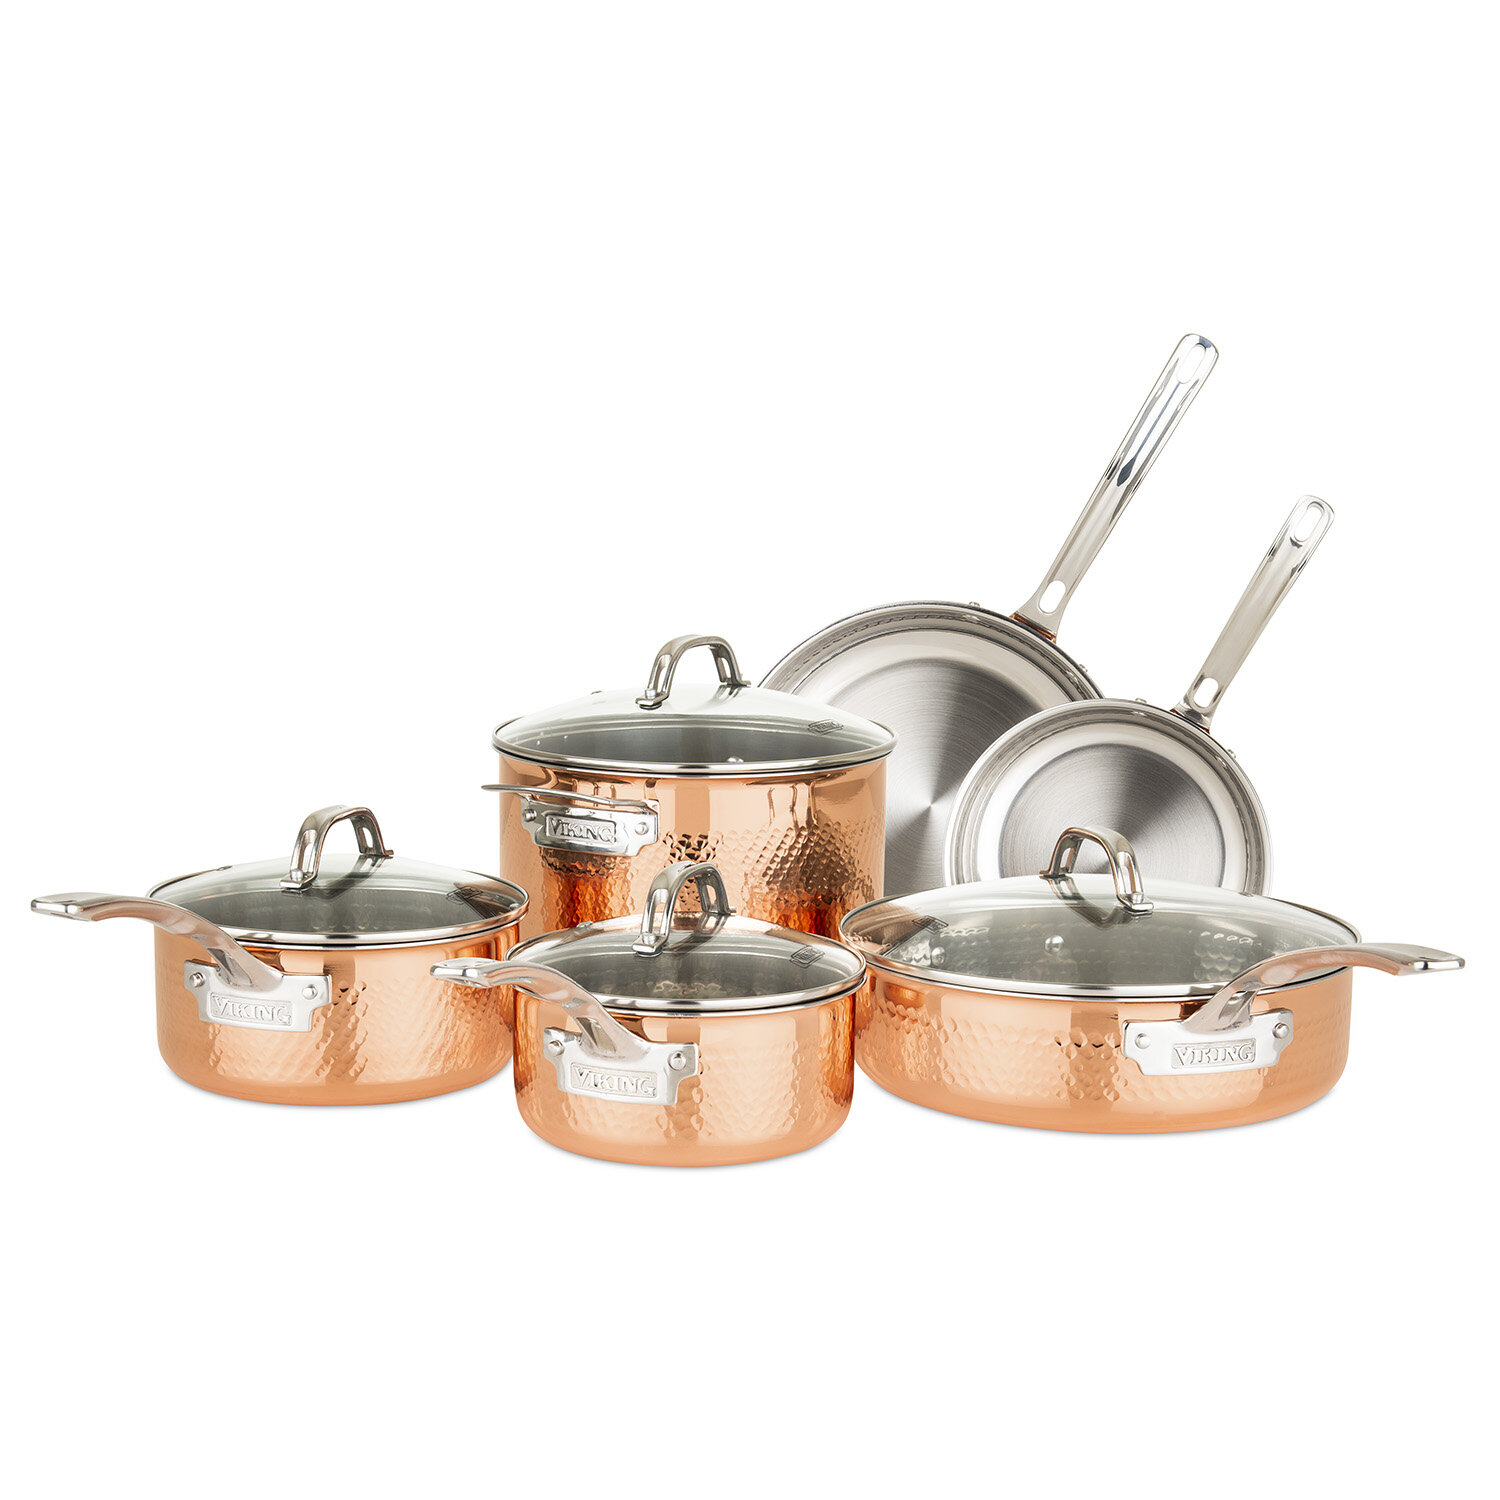 Viking Hammered Copper Clad 10 Piece Cookware Set & Reviews